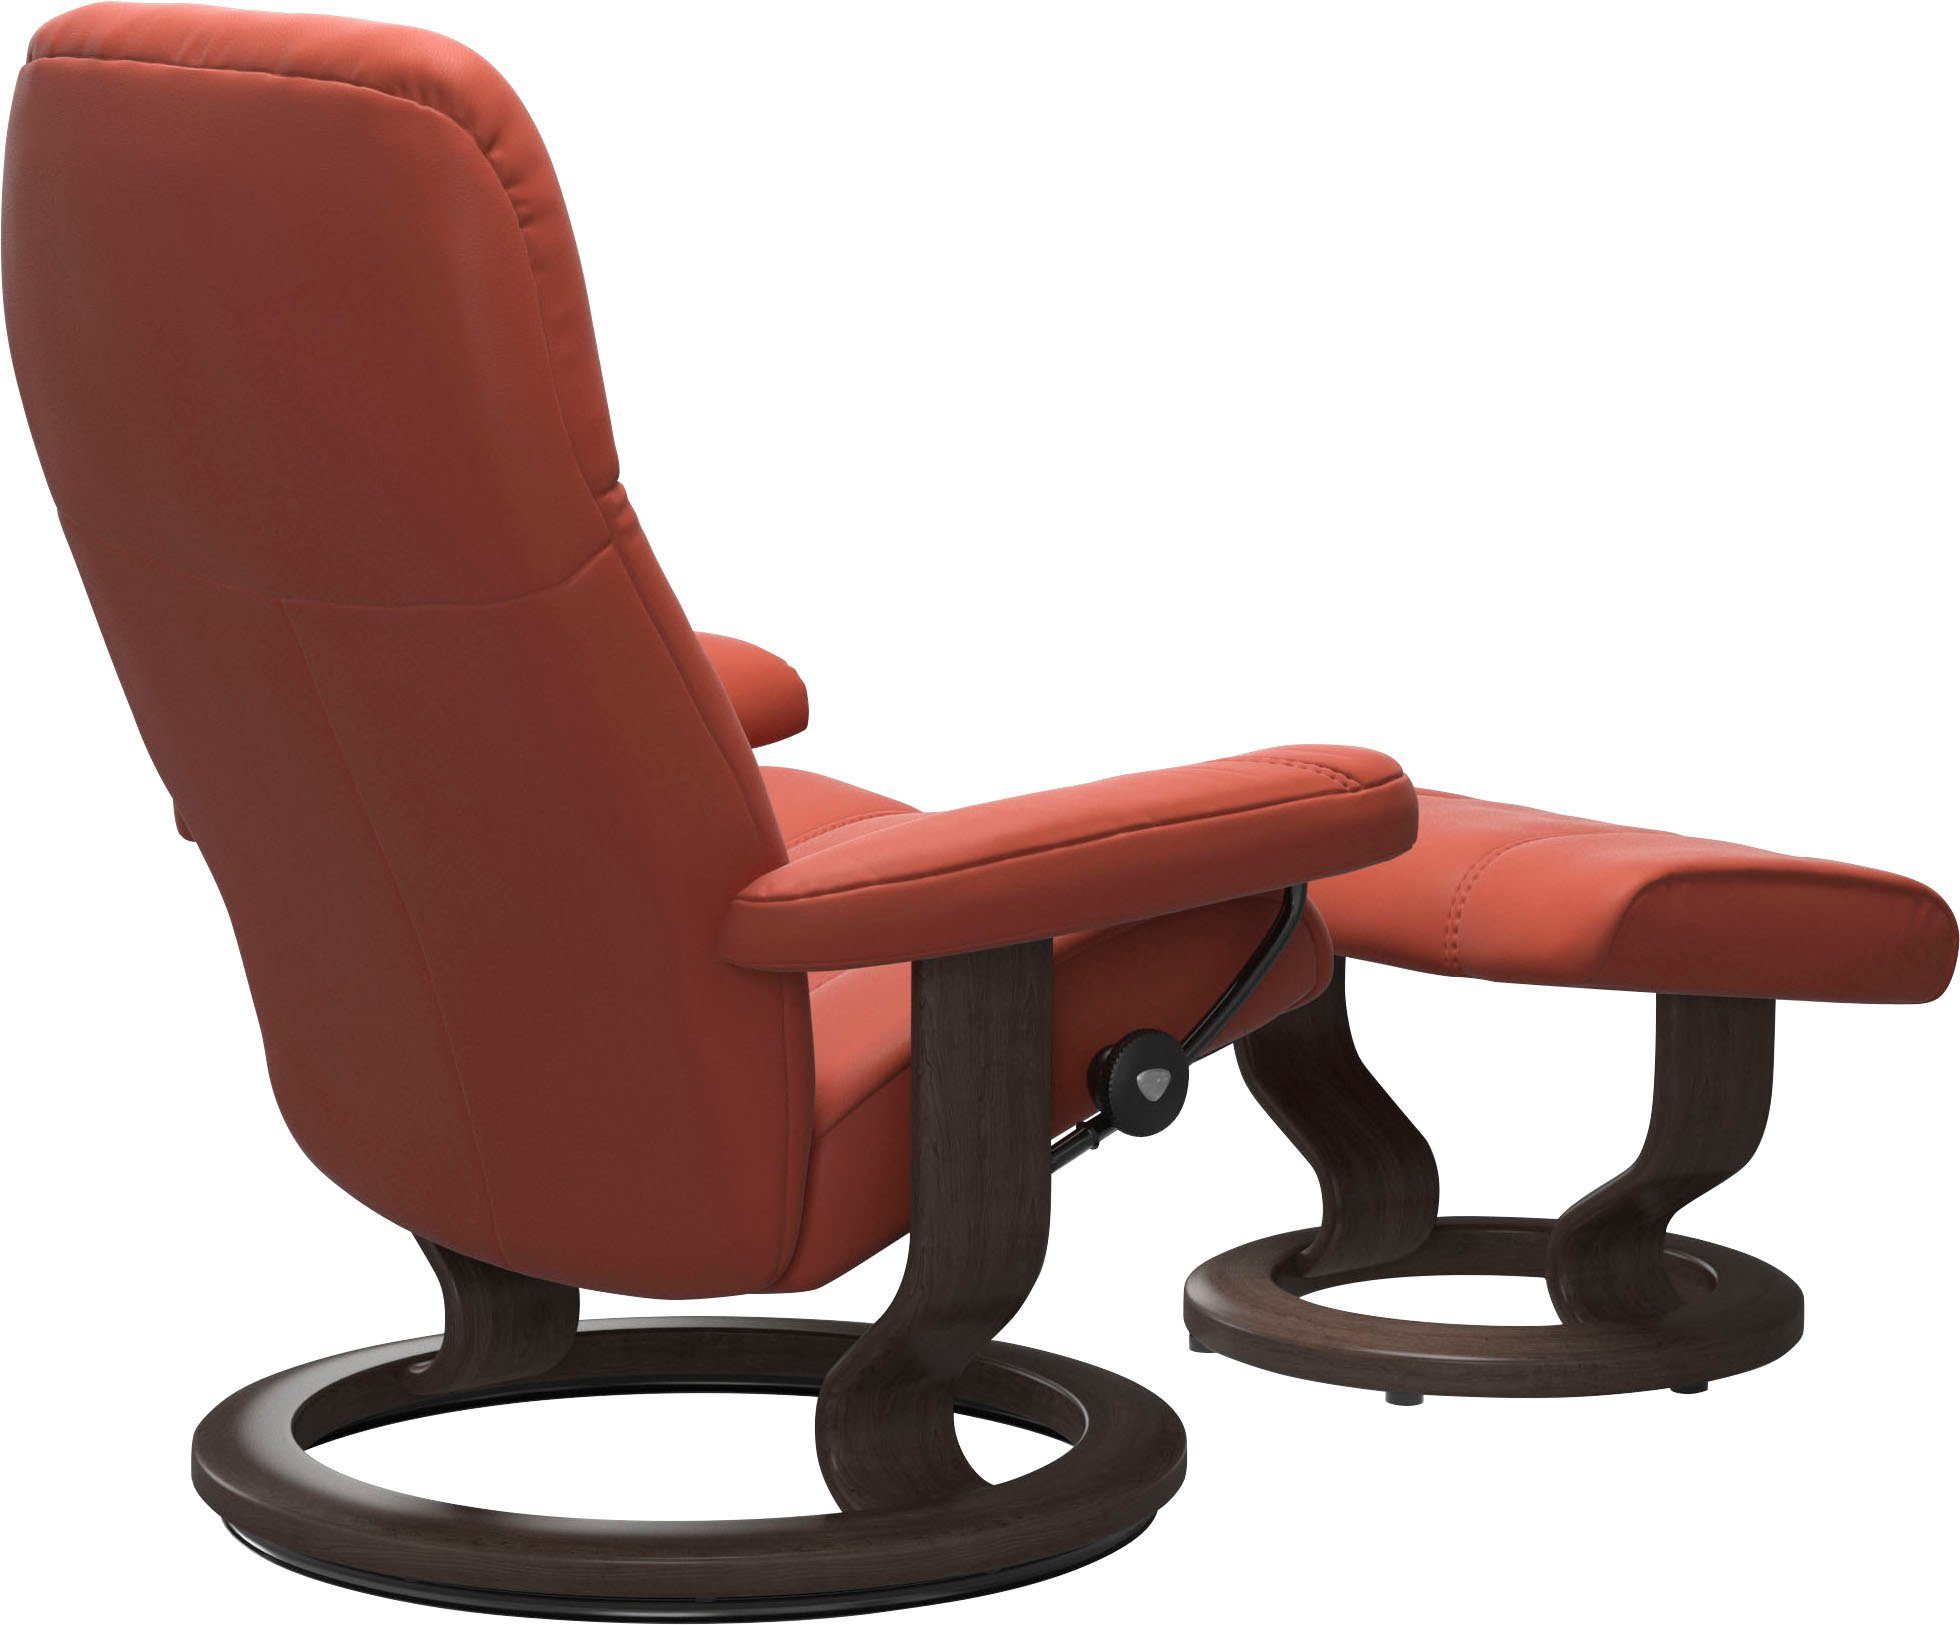 mit Base, Gestell S, Relaxsessel Classic Stressless® Größe Wenge Consul,